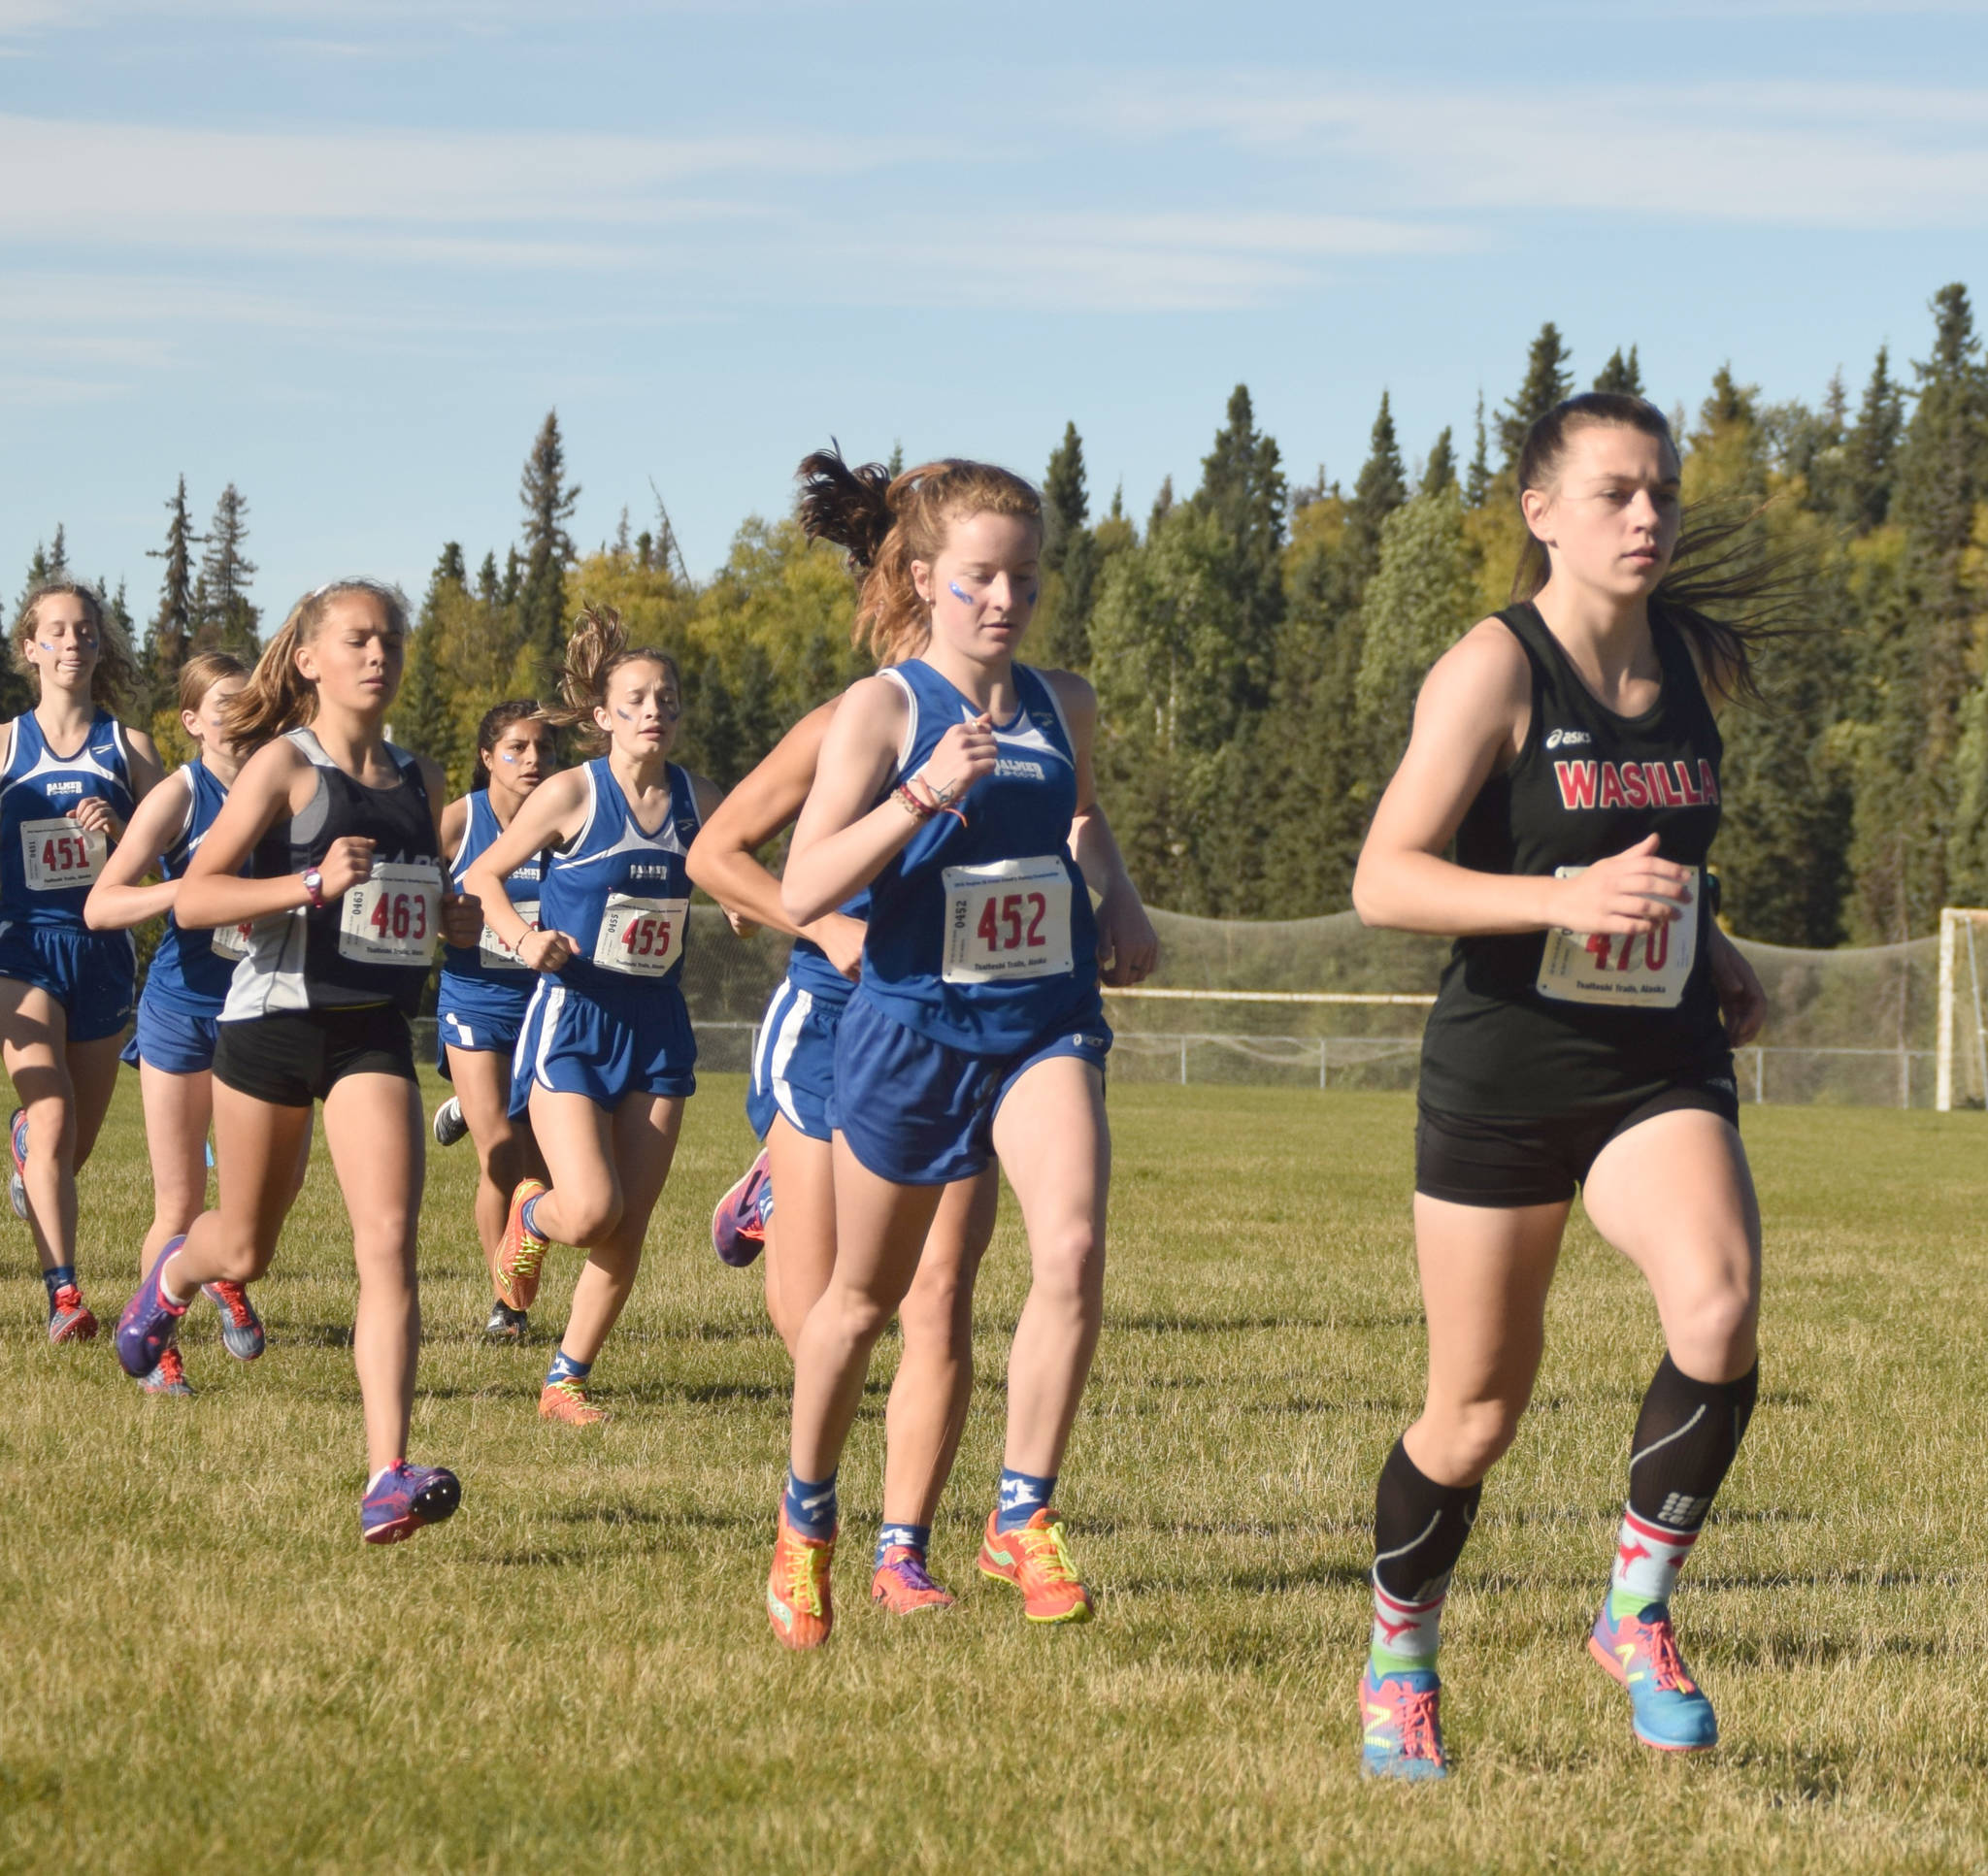 Soldotna’s Jordan Strausbaugh tucks in behind Wasilla’s Allison VanPelt and Palmer’s Katey Houser early in the Division I girls race at the Region 3 meet Saturday, Sept. 22, 2018, at Tsalteshi Trails. (Photo by Jeff Helminiak/Peninsula Clarion)